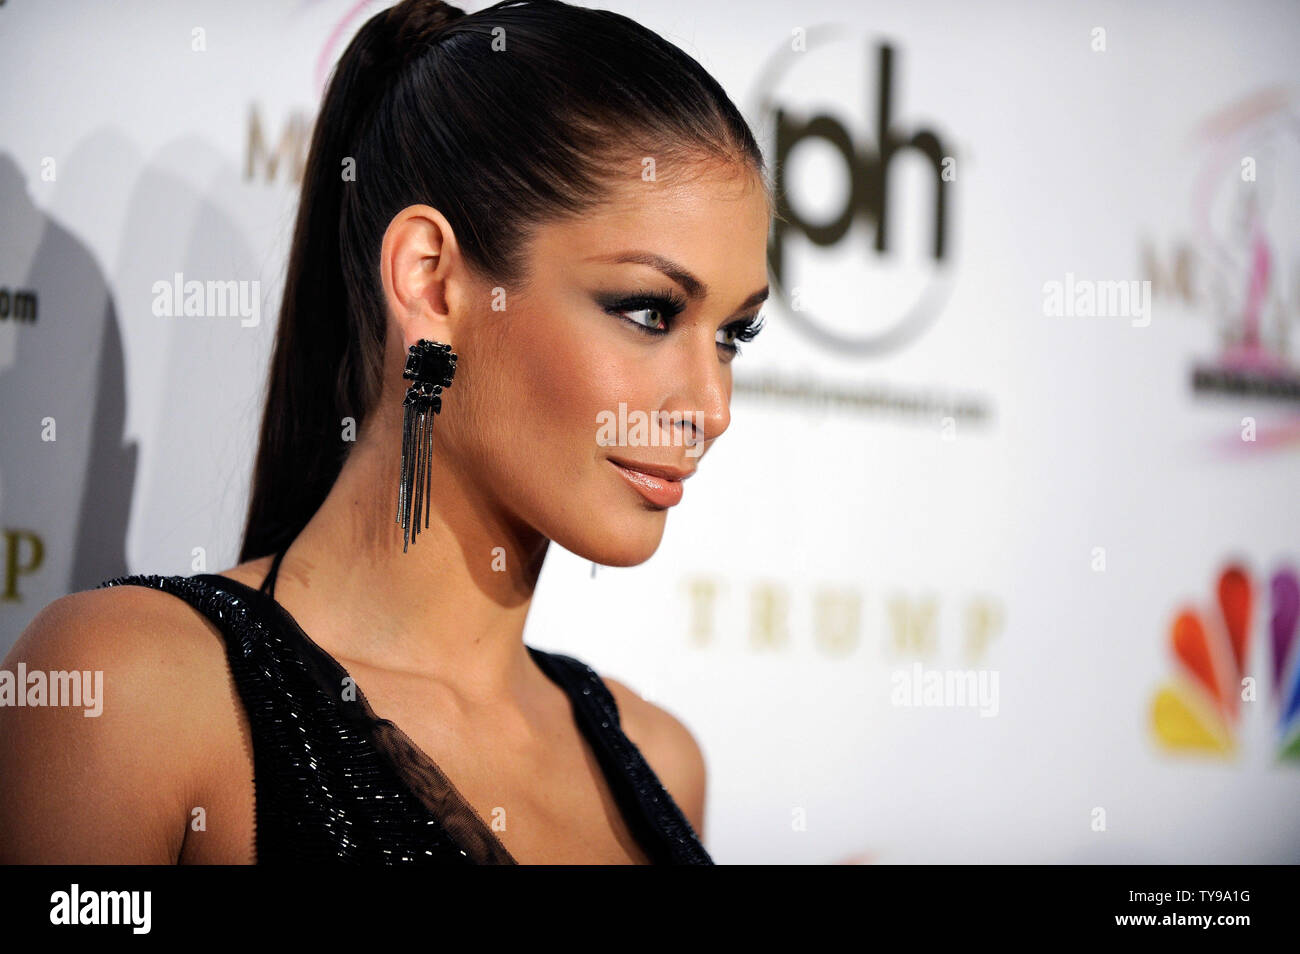 Miss Universe 2008 Dayana Mendoza arrives at the 2012 Miss USA competition at the Planet Hollywood Resort and Casino in Las Vegas, Nevada on June 3, 2012.  UPI/David Becker Stock Photo